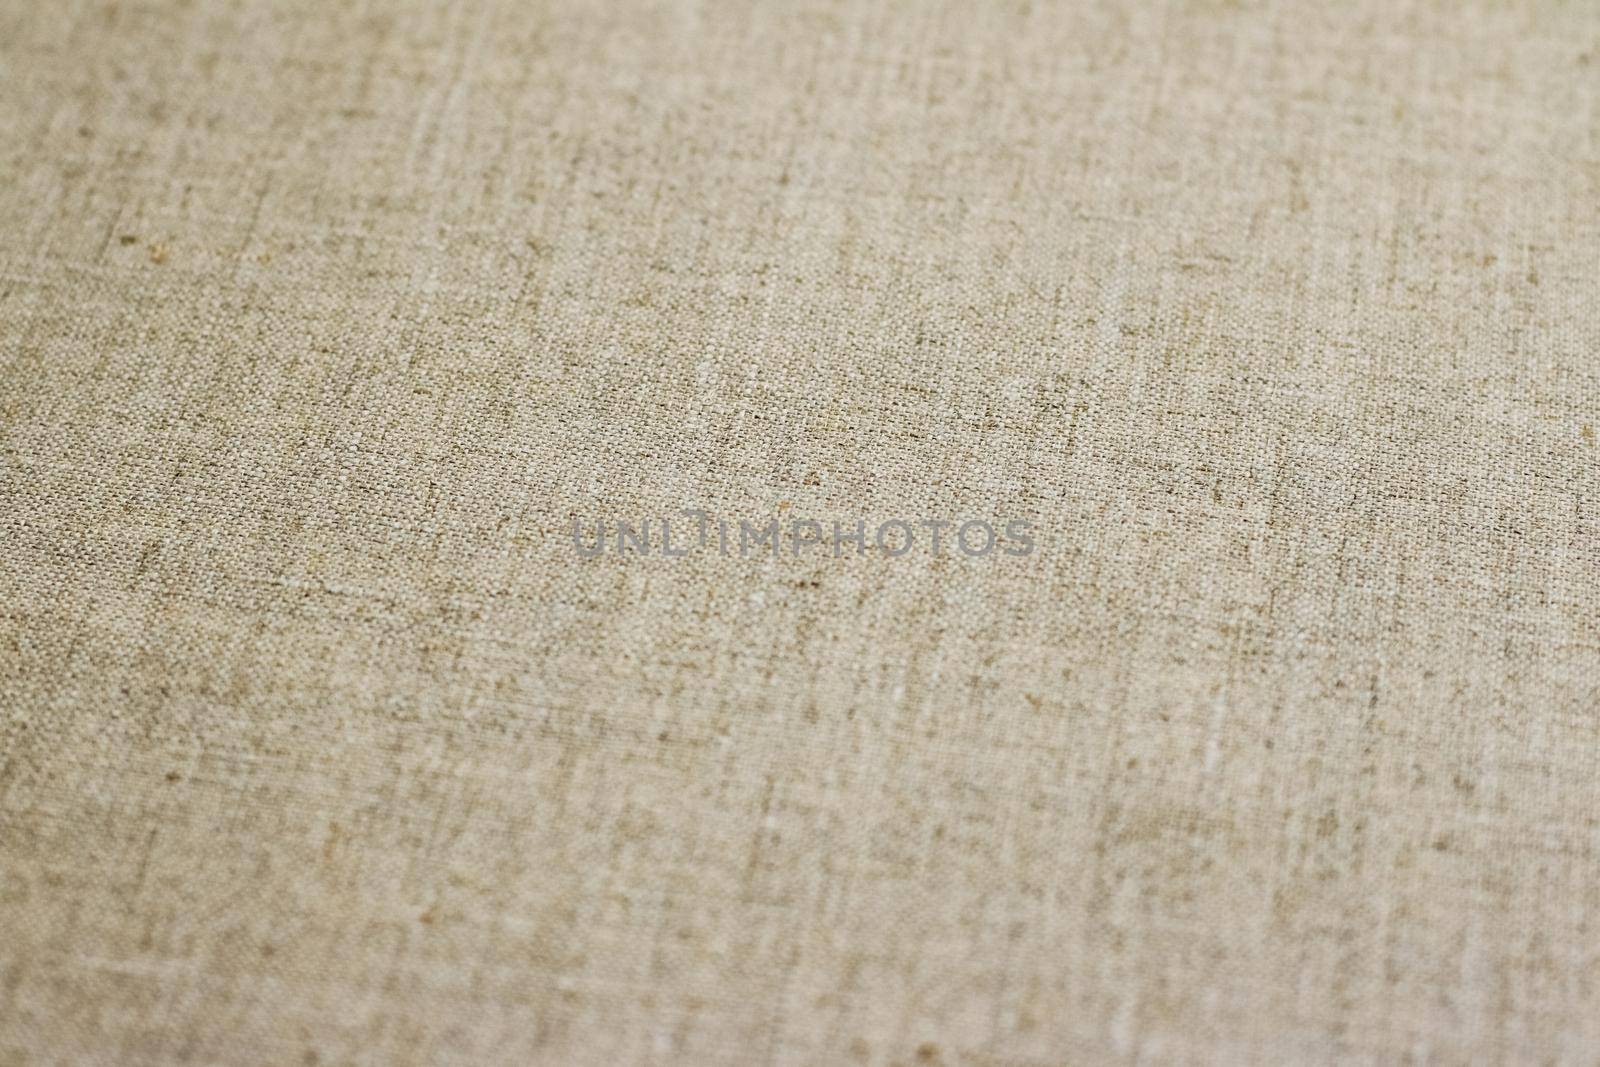 Natural realistic backdrop, material and artwork concept - Linen canvas texture background